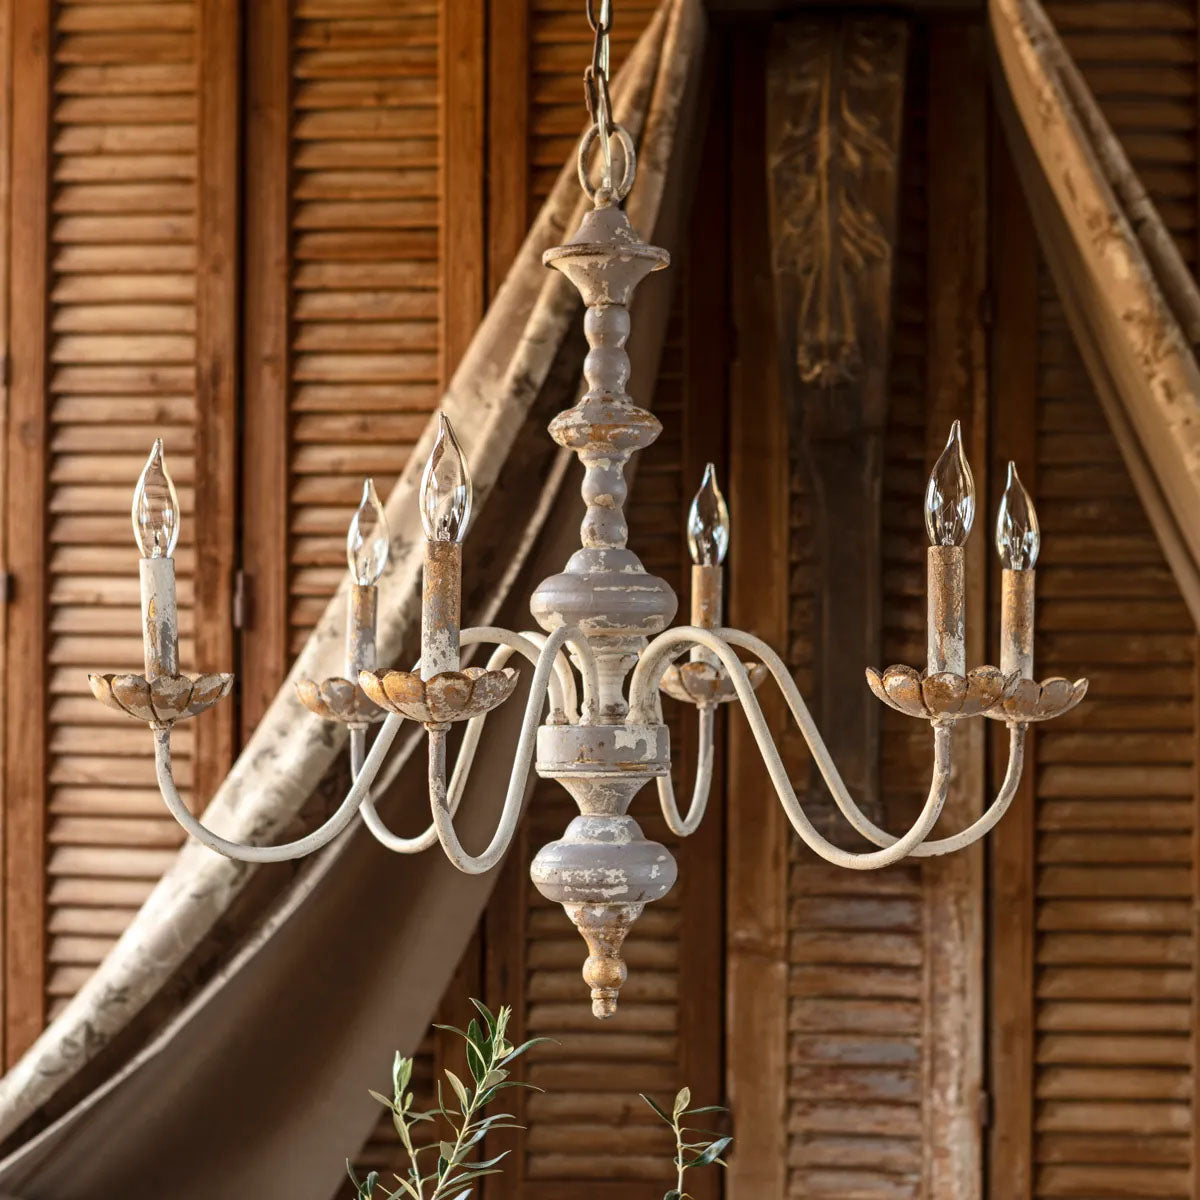 Cottage Charm Chandelier - More Coming Soon!